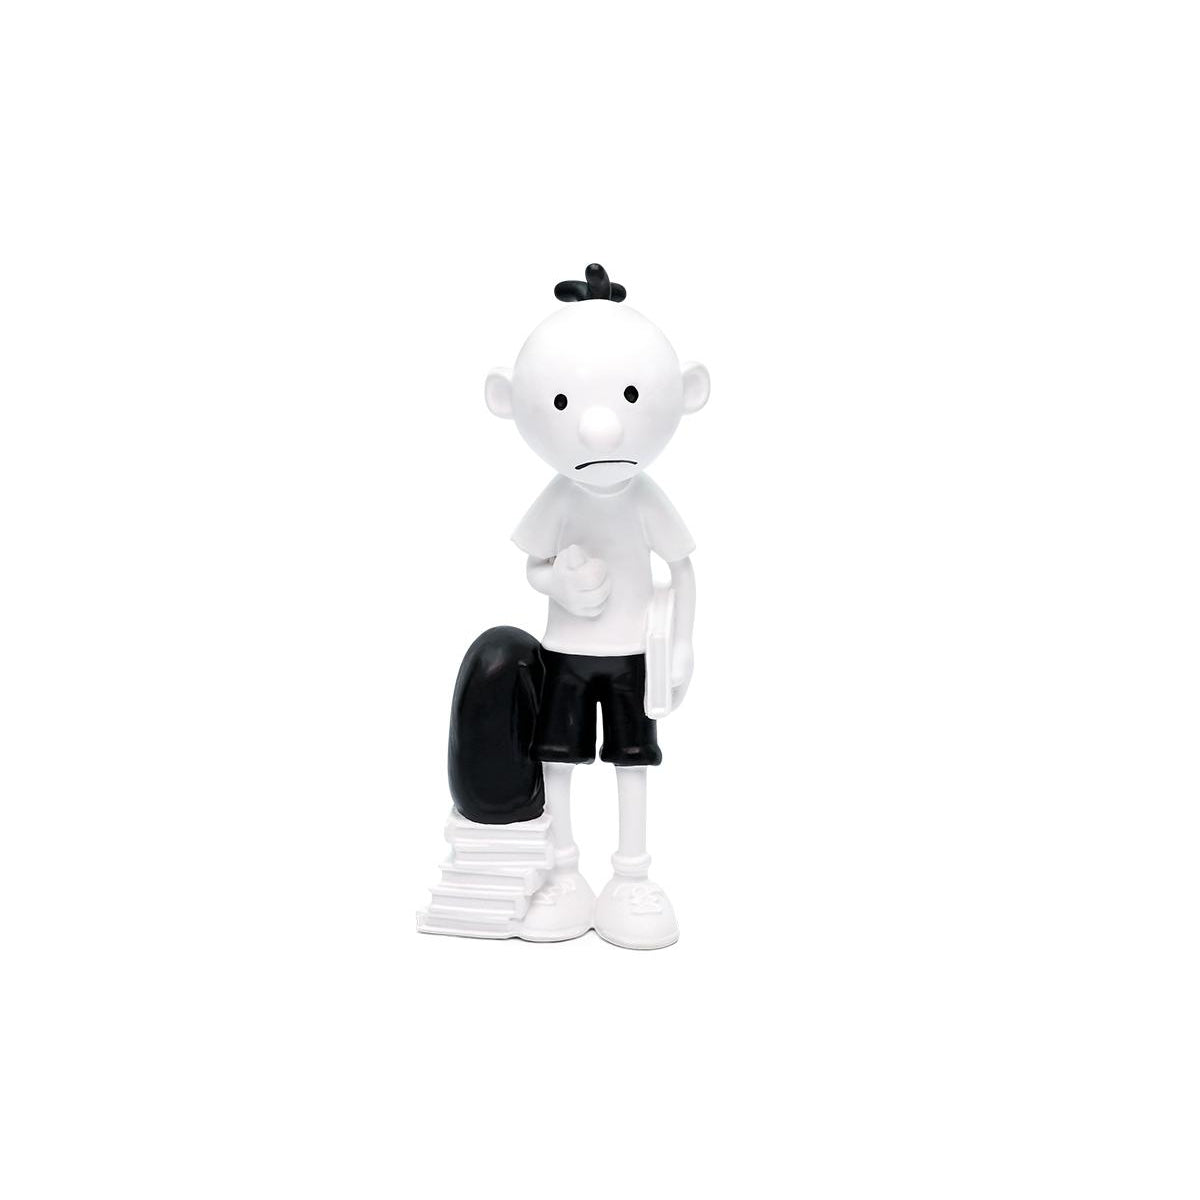 Diary of a Wimpy Kid Tonie Figure